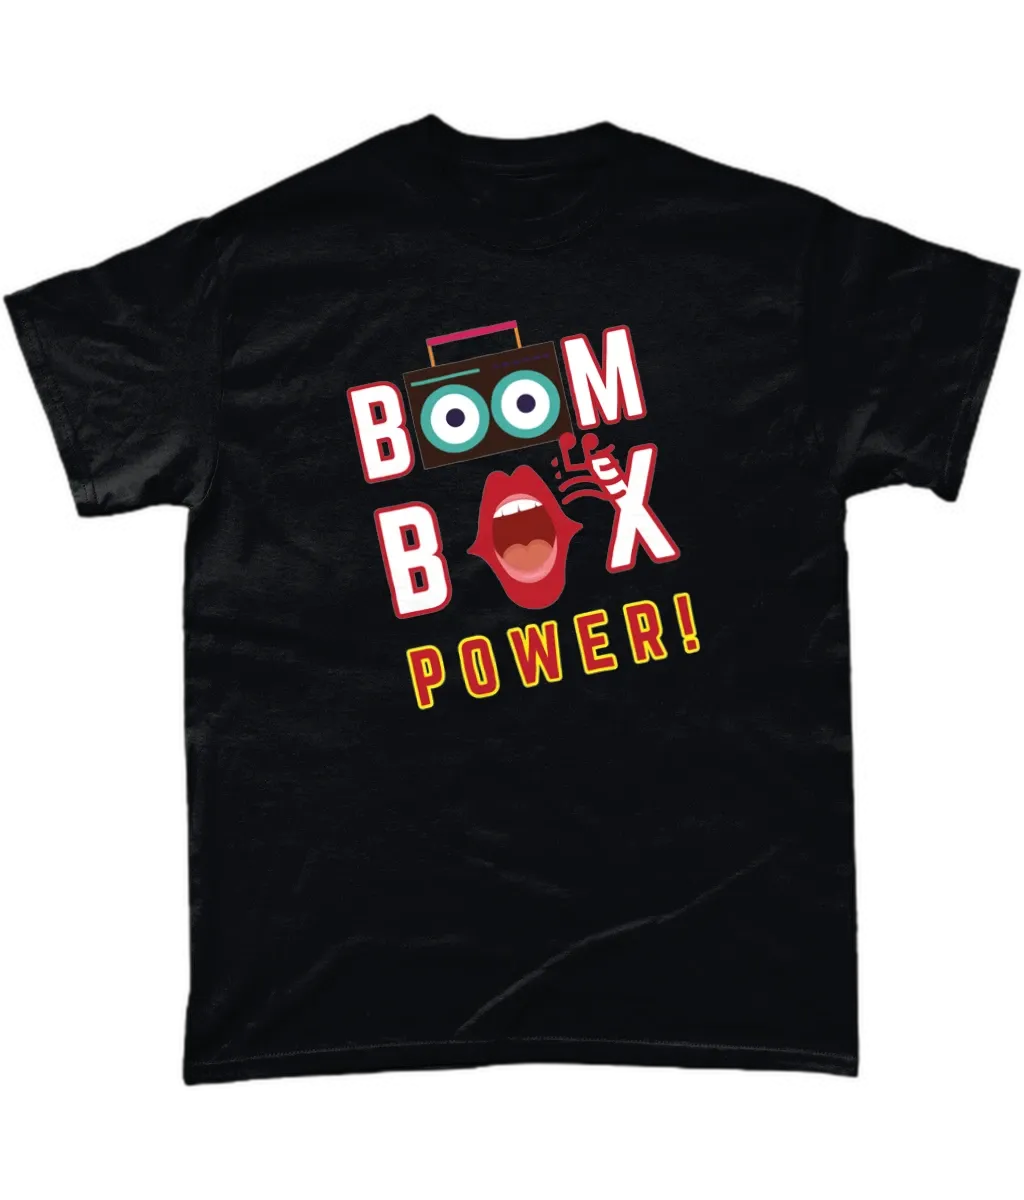 Black T-shirt says BOOM BOX POWER! A boombox, the speakers make the Os in the word BOOM, a mouth indicating its singing as the O in BOX